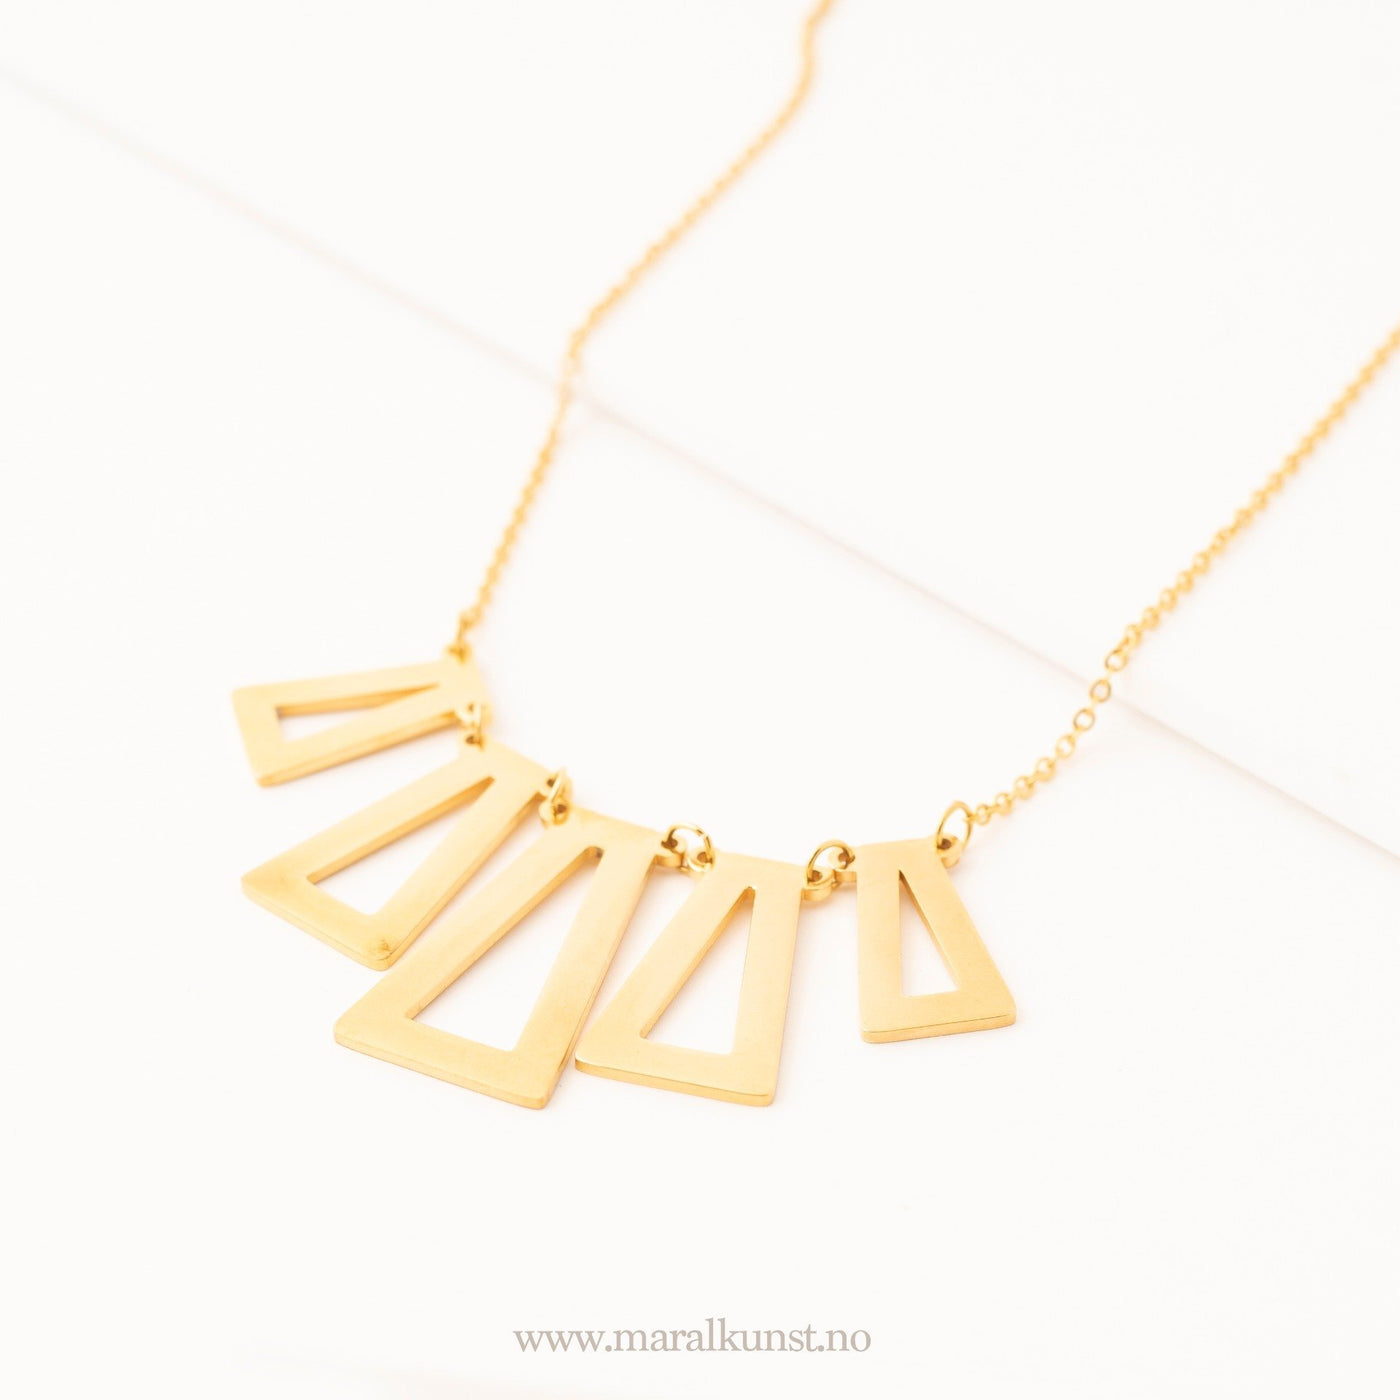 Mana Gold Plated Steel Necklace - Maral Kunst Jewelry